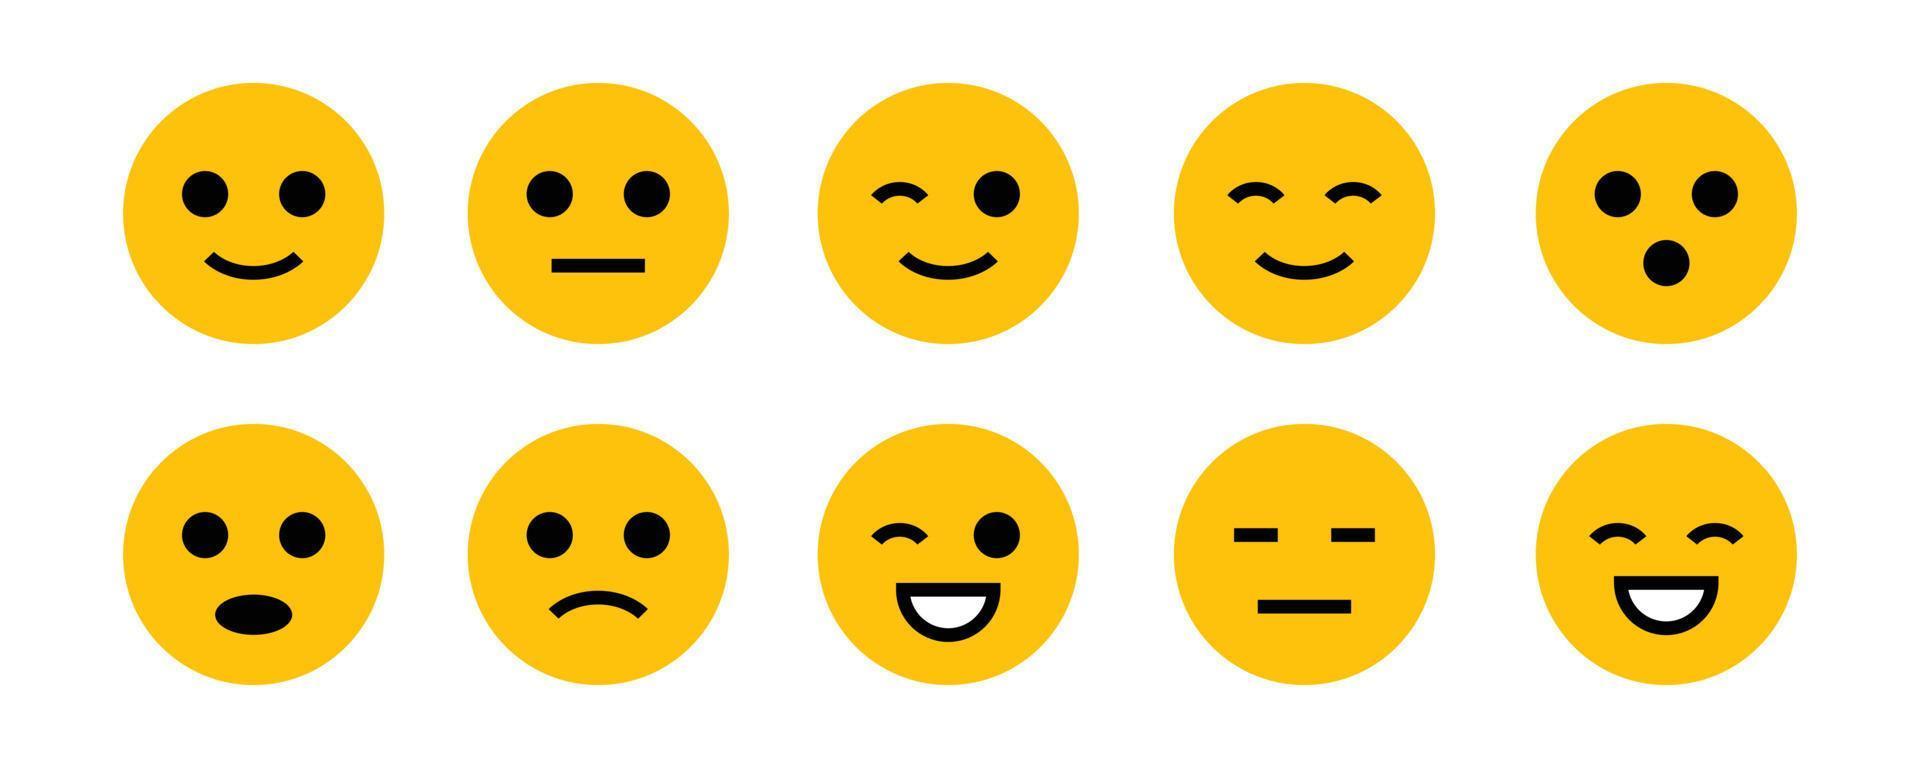 Yellow emojis for emoticon in chat vector